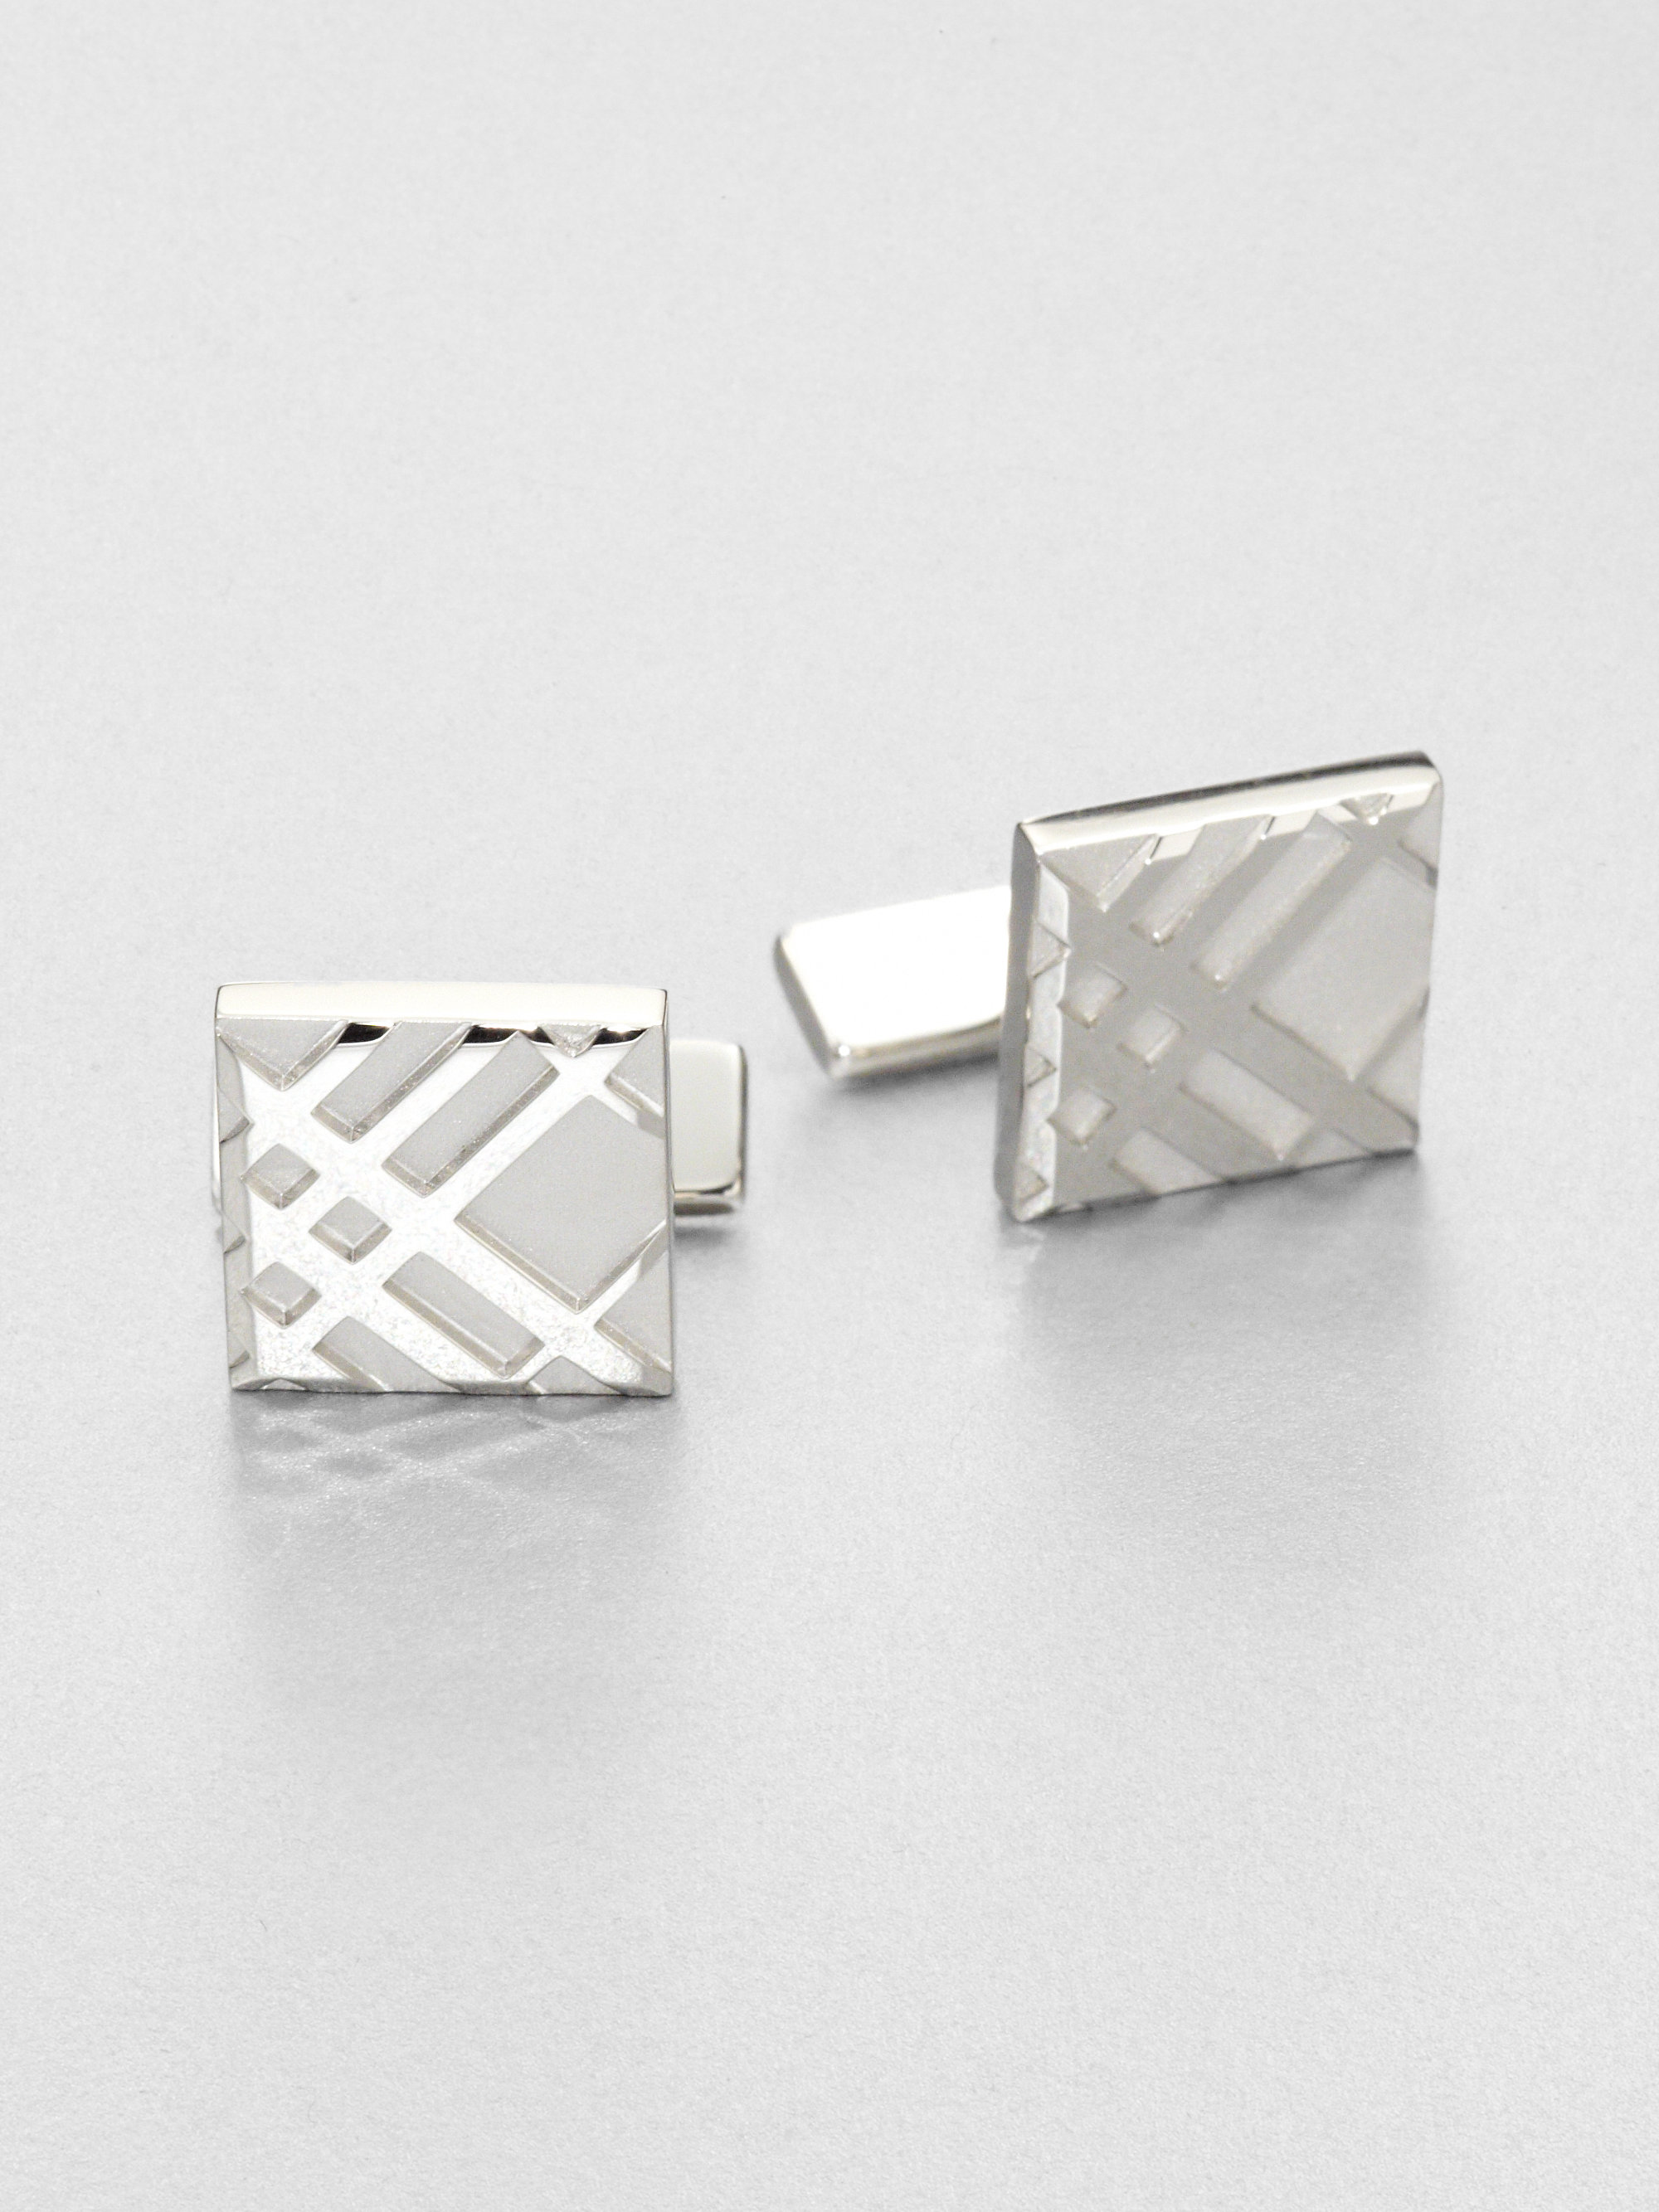 buy > burberry cufflinks sale > Up to 77% OFF > Free shipping